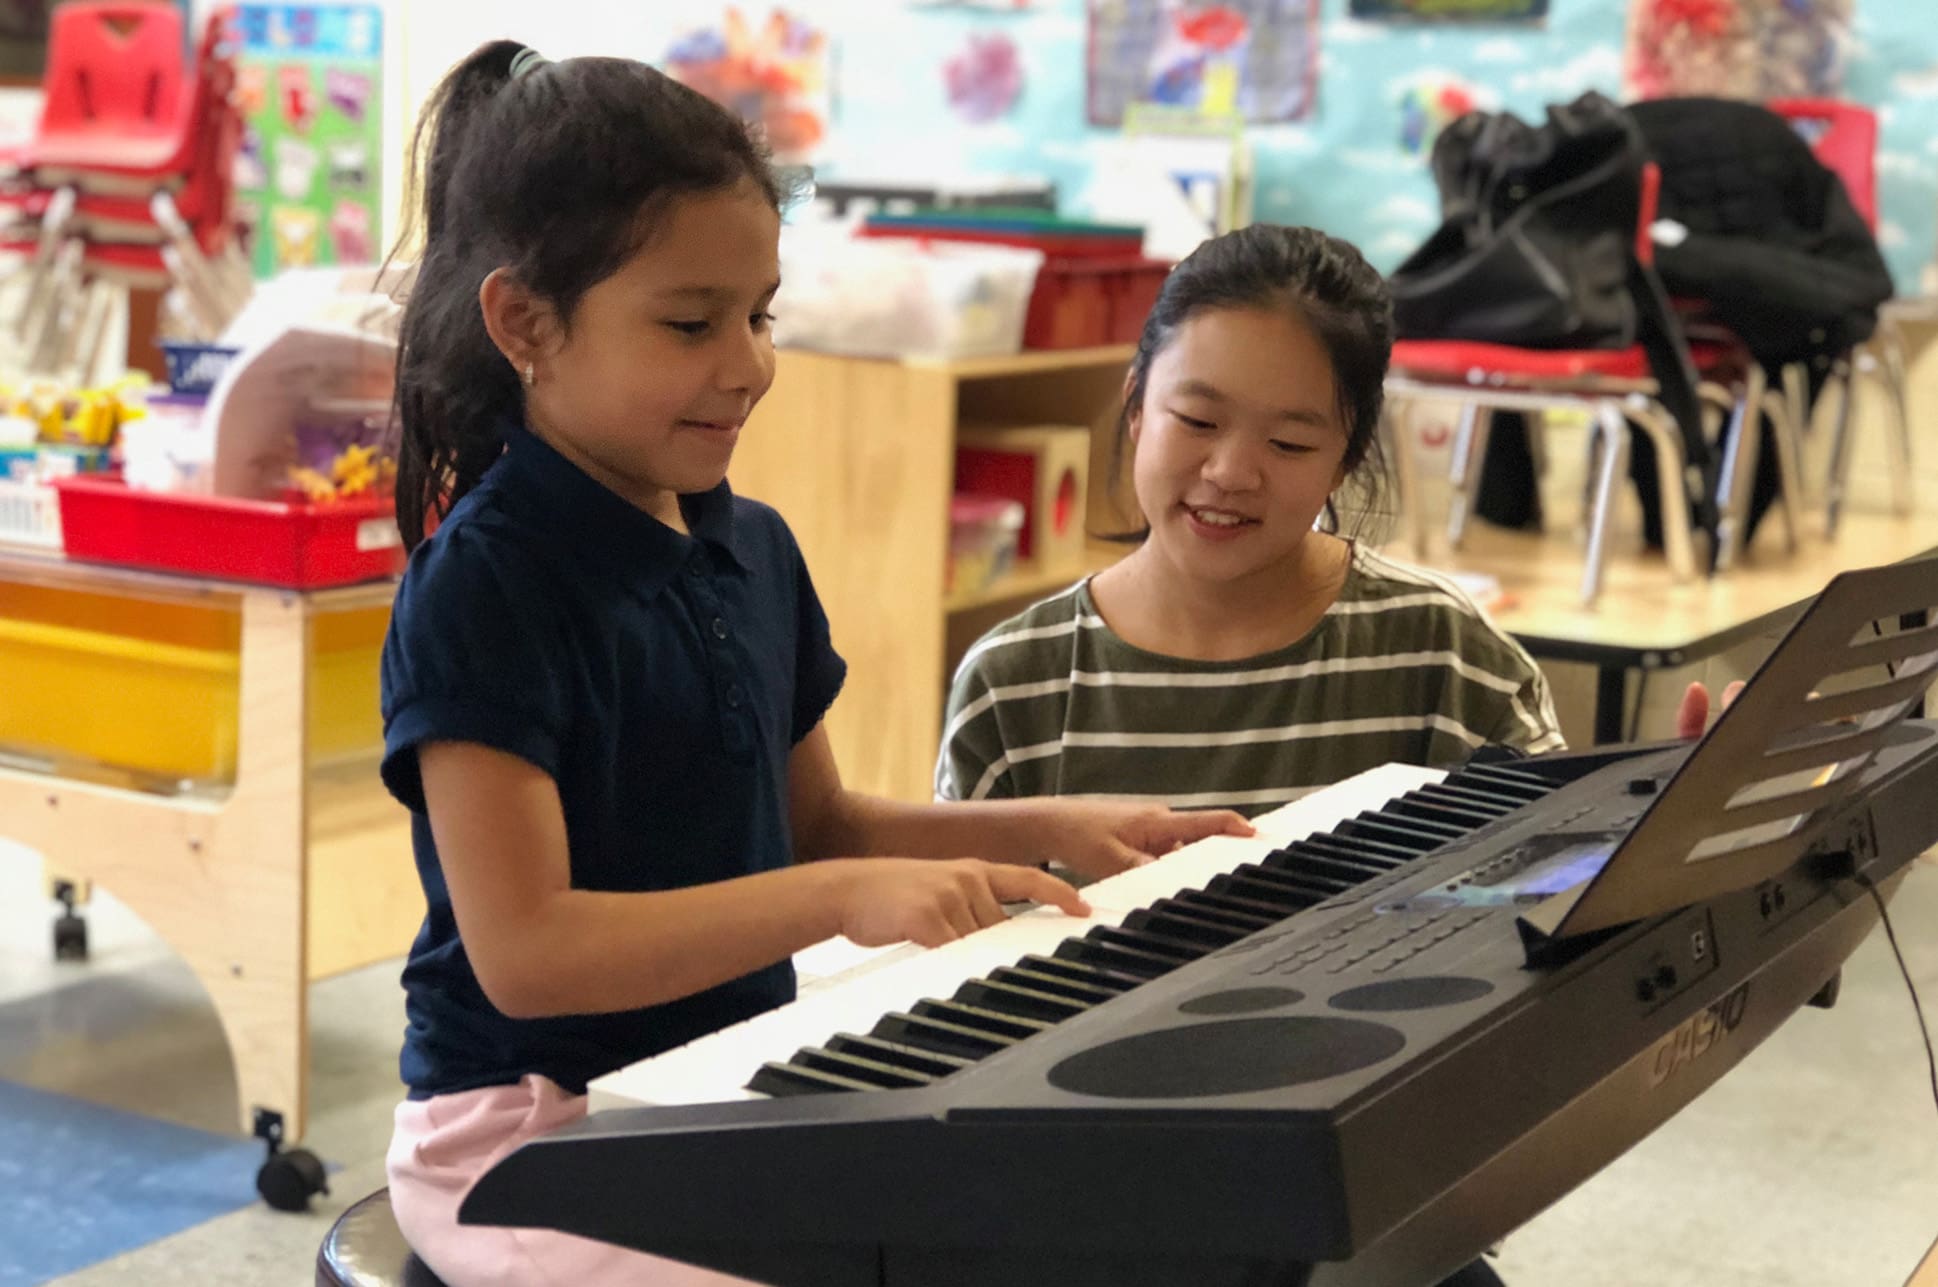 An NEC student teaches a child piano